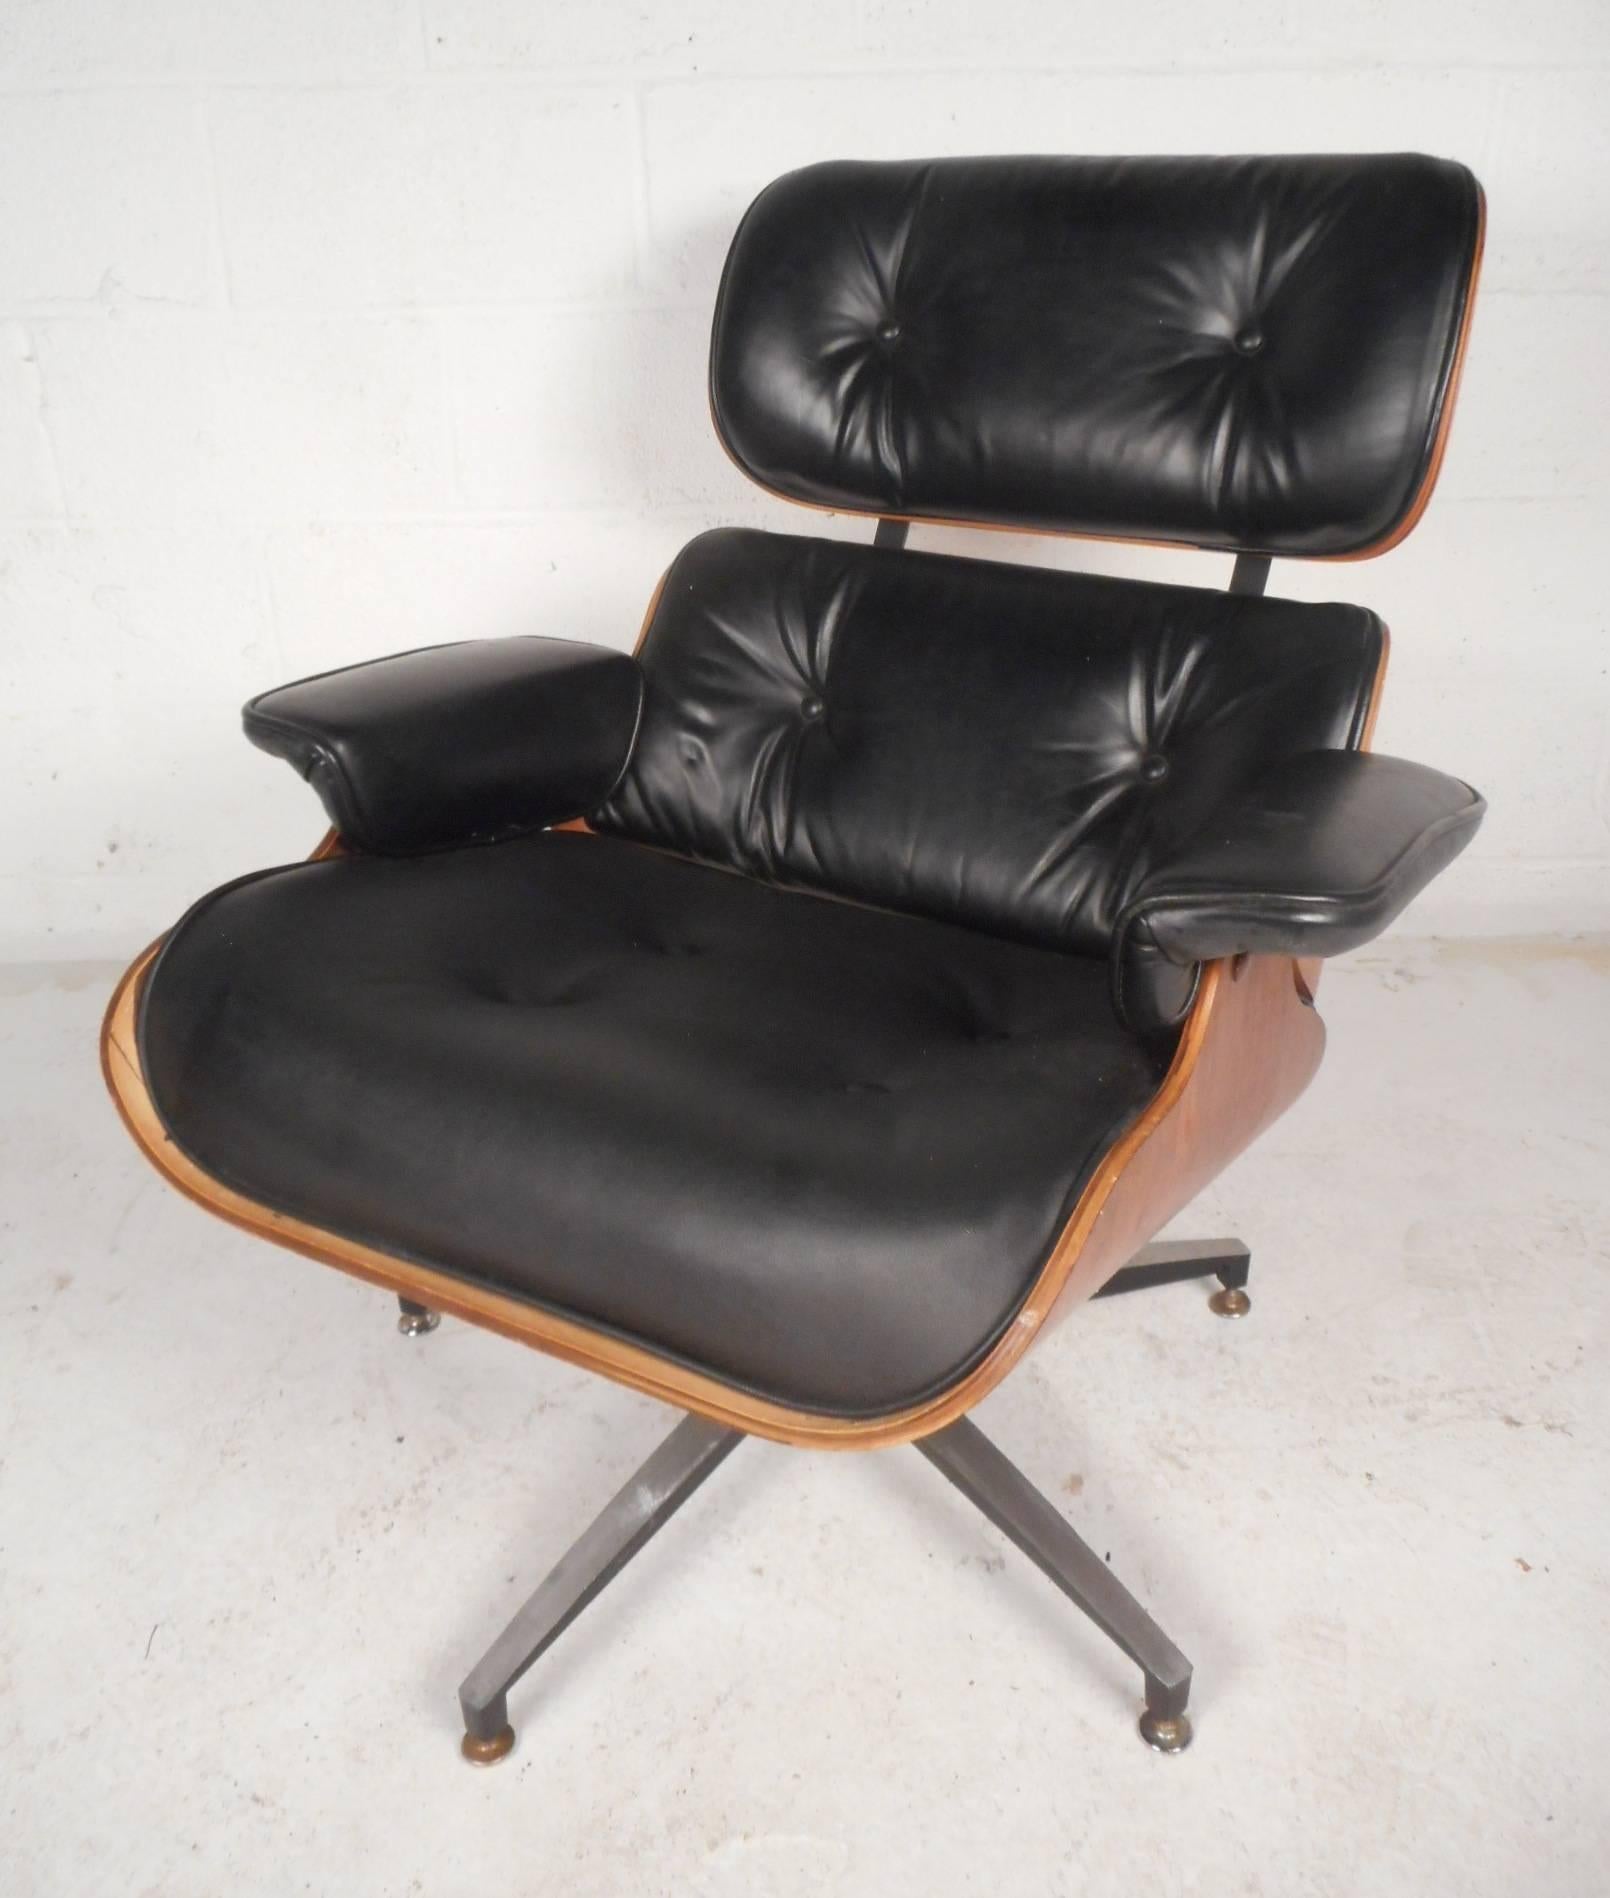 Gorgeous vintage modern lounge chair and ottoman with a hard shell walnut frame. Sleek design is upholstered in black tufted vinyl with a metal swivel/tilt base. Comfortable and stylish seating has the perfect contours for the body with unusual